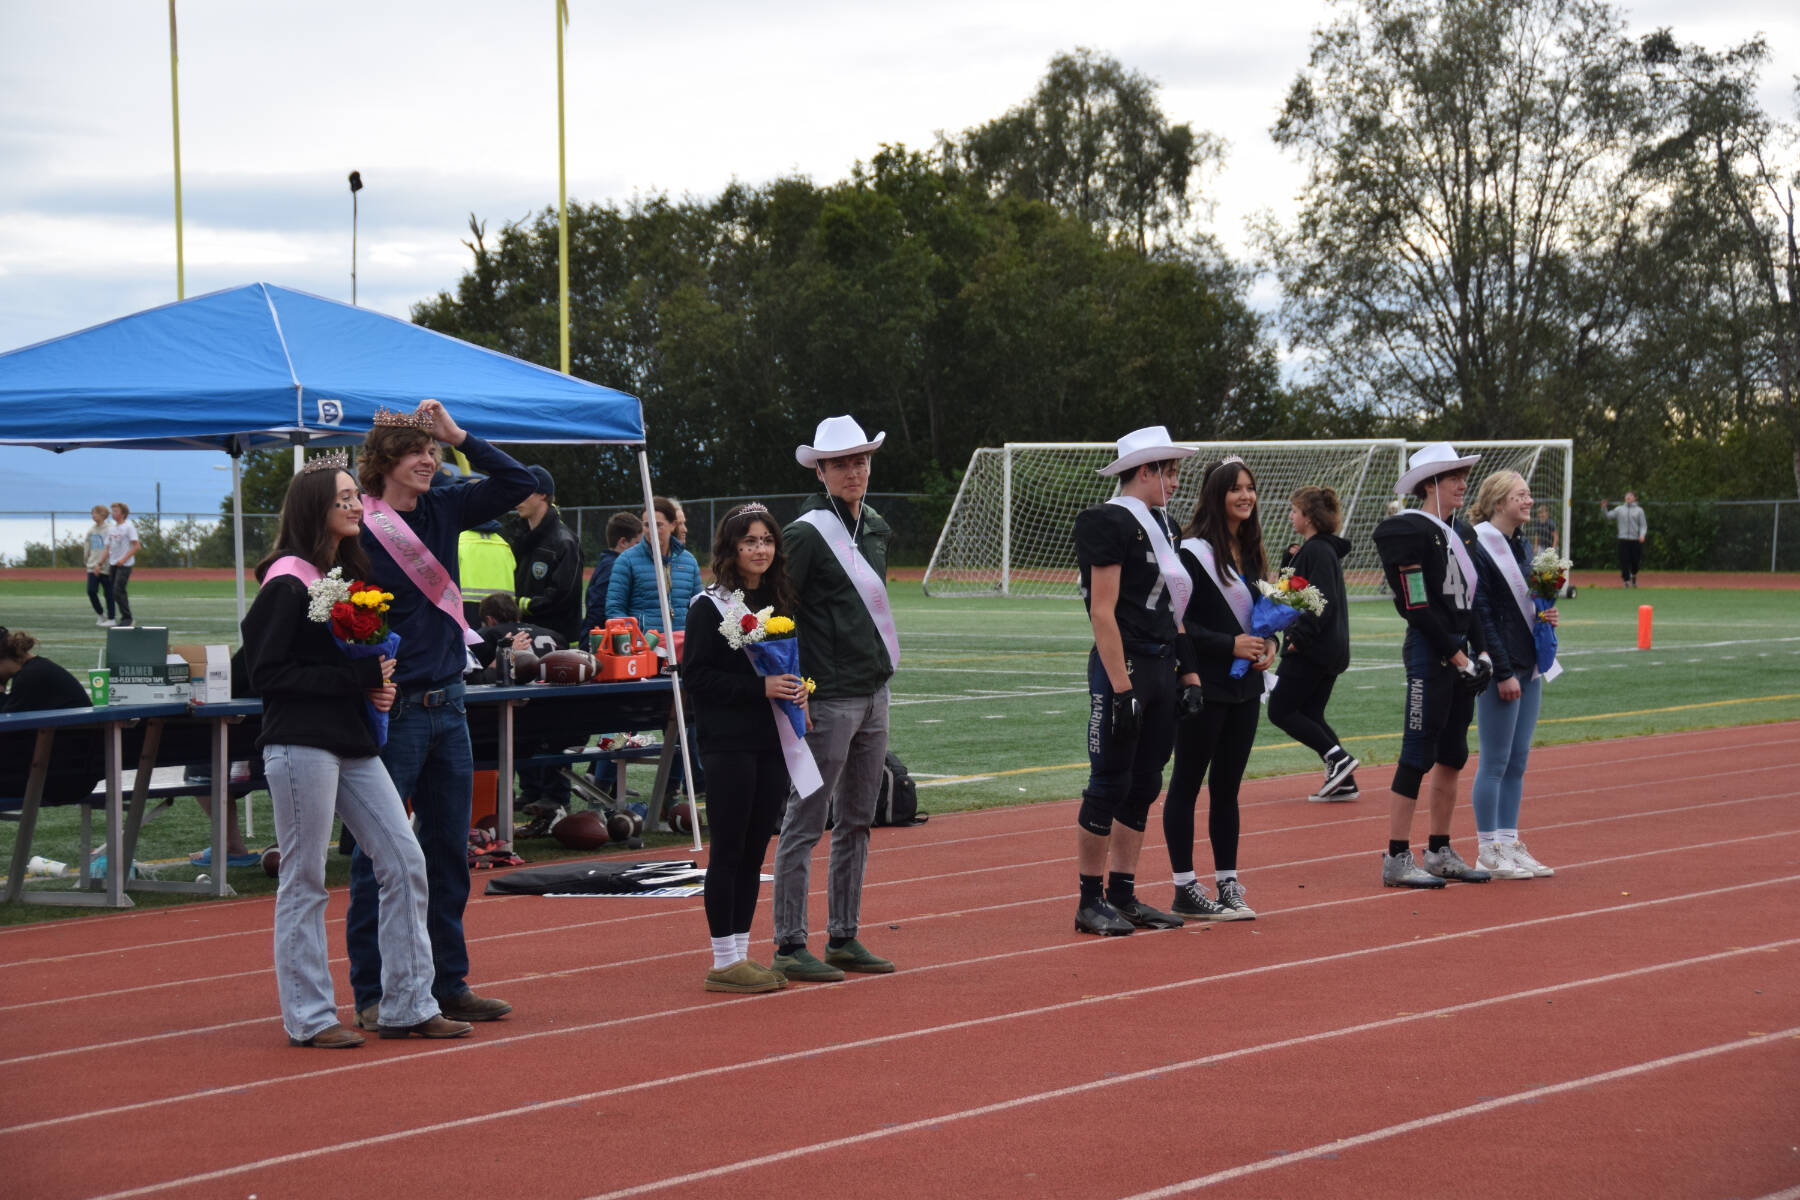 The Homer High School homecoming royalty are crowned during halftime at the homecoming game versus Palmer on Friday, Sept. 8, 2023 in Homer, Alaska. (Delcenia Cosman/Homer News)